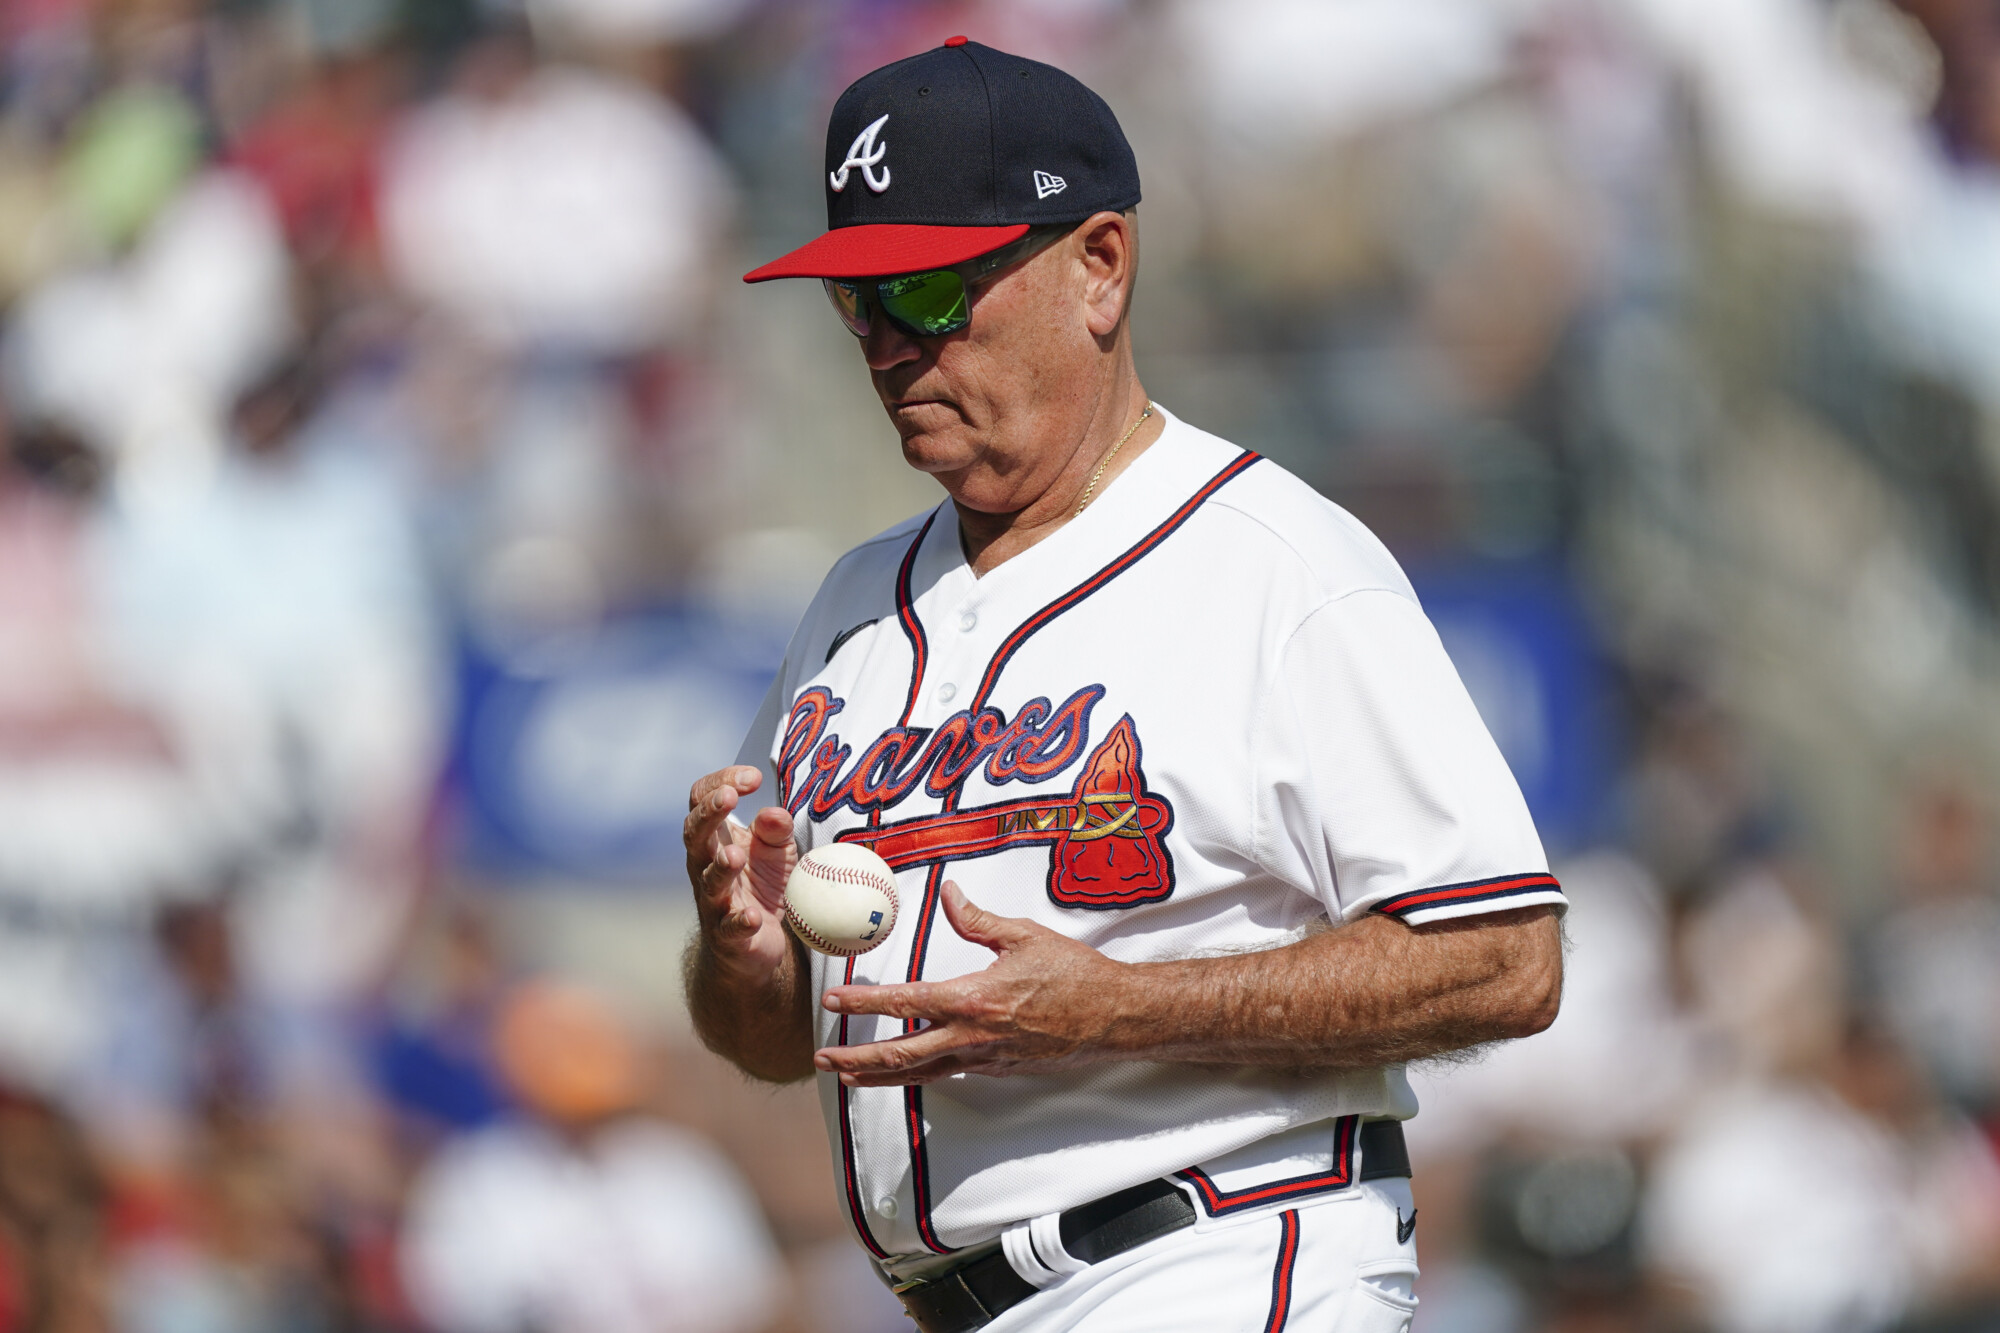 MLB notebook: Braves give Manager Brian Snitker extension